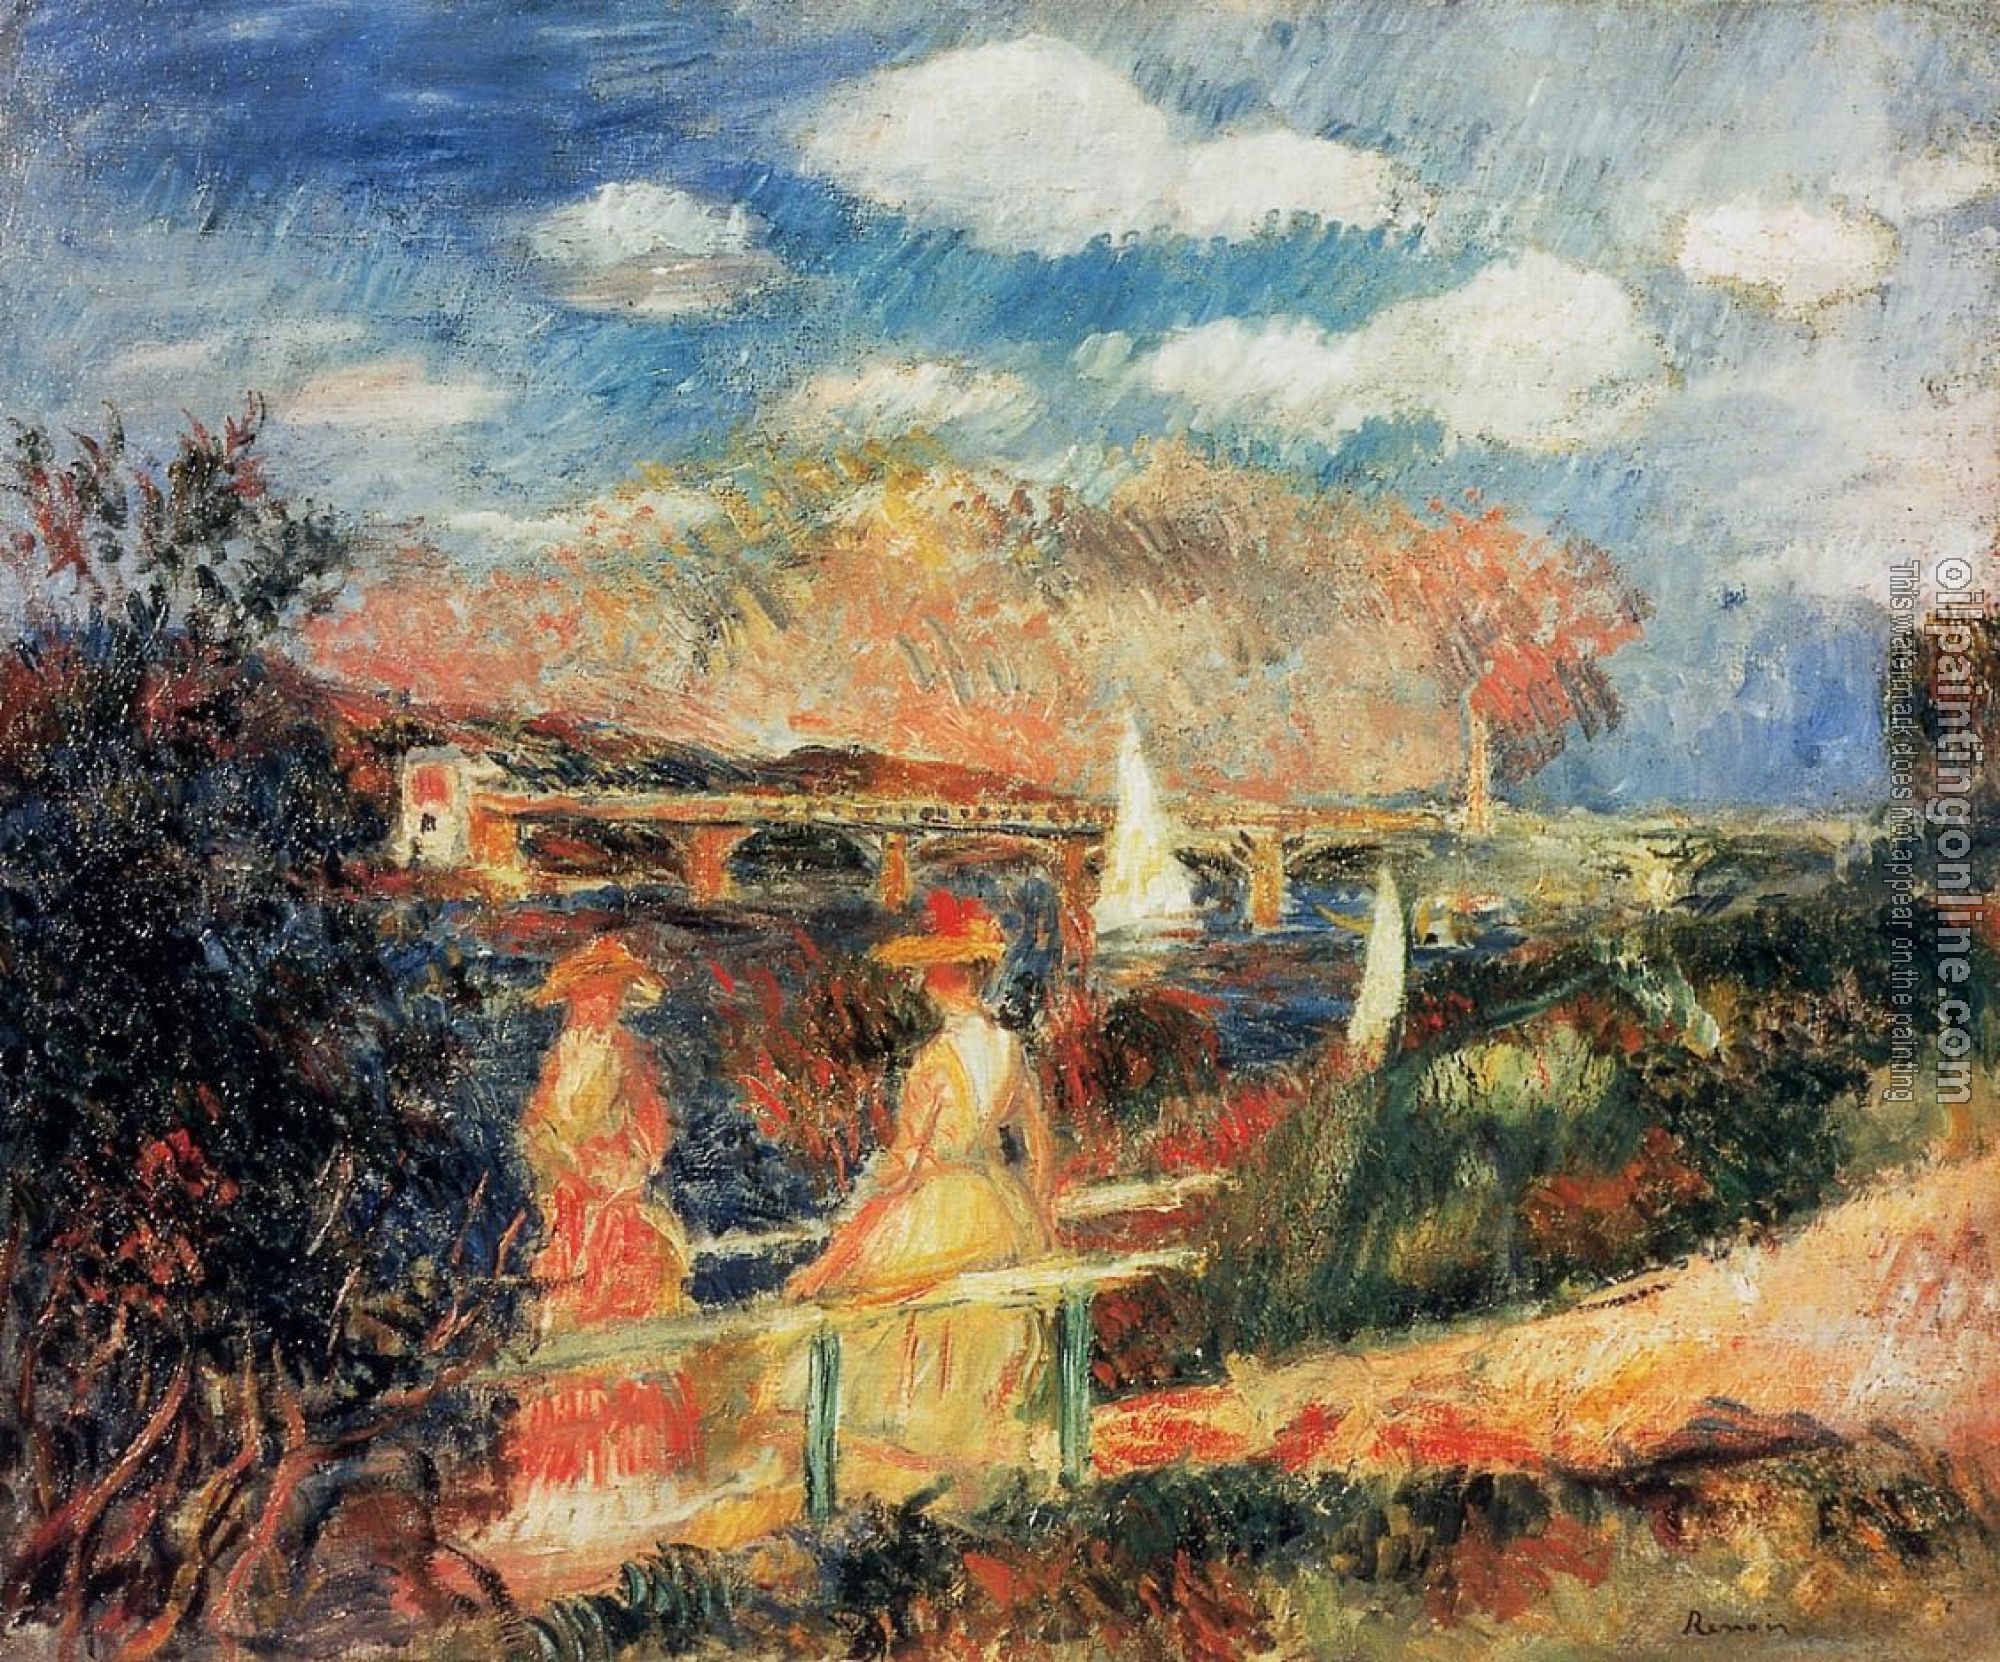 Renoir, Pierre Auguste - The Banks of the Seine at Argenteuil